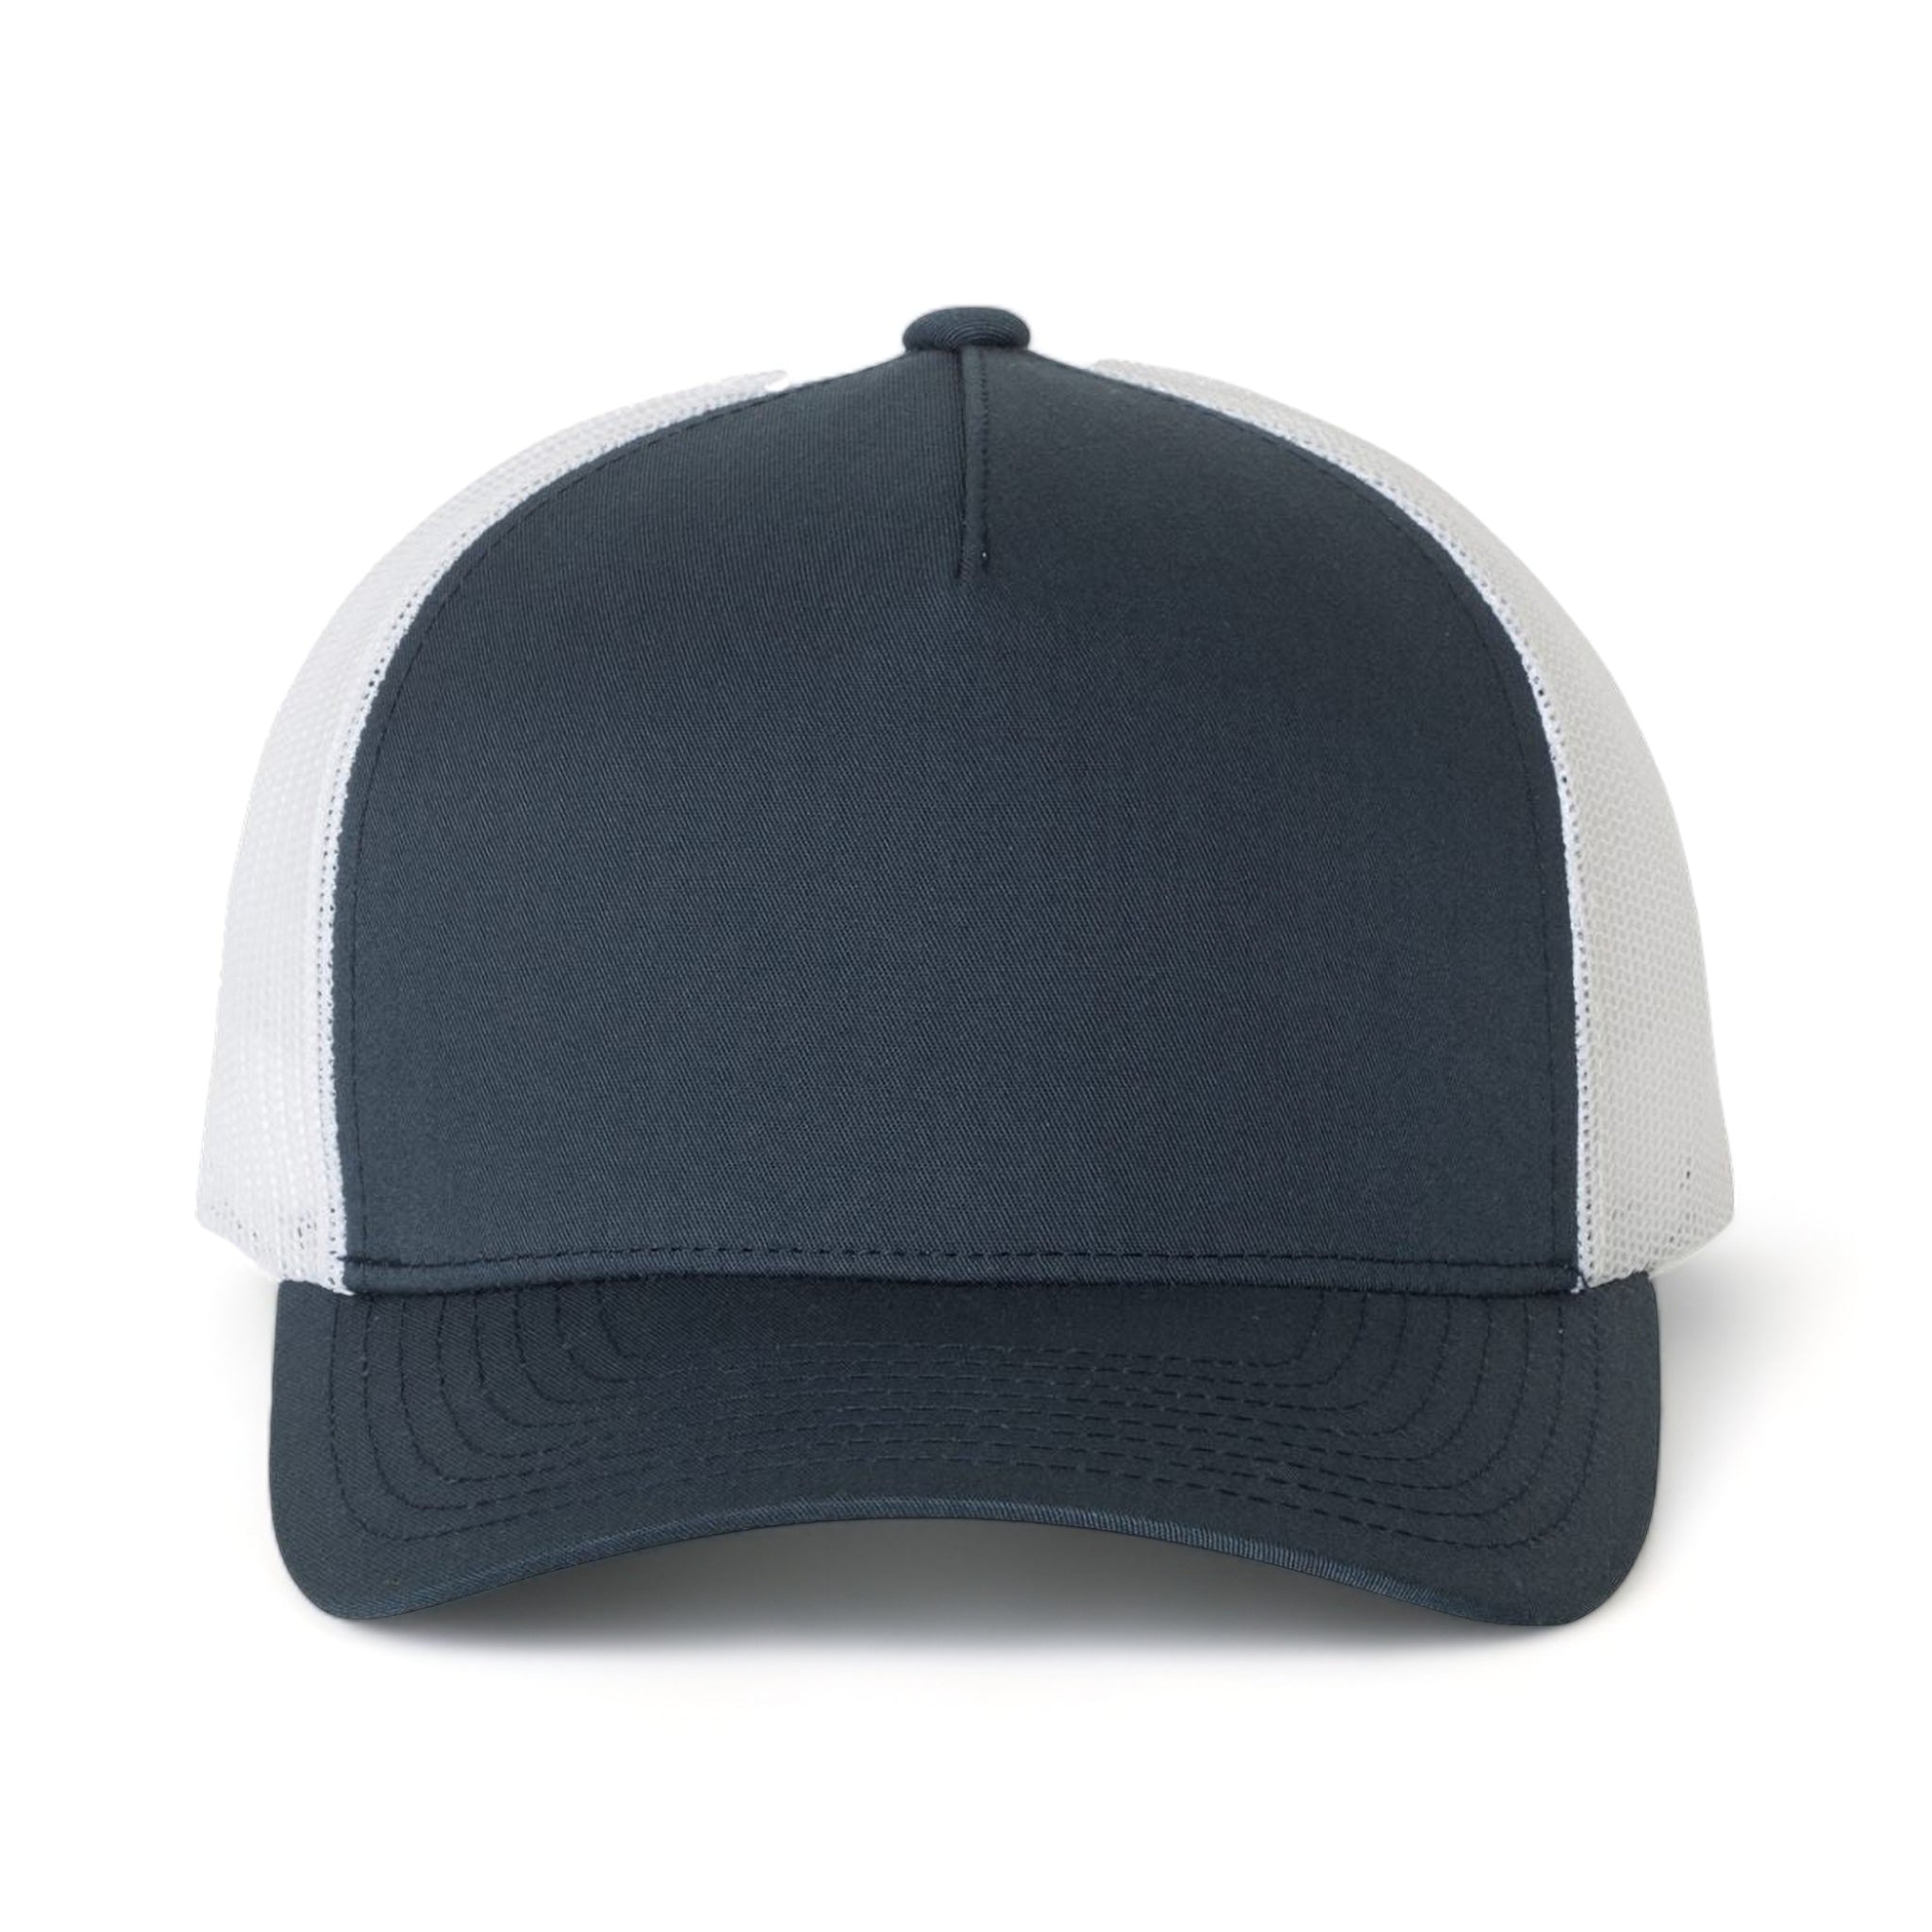 Front view of YP Classics 6506 custom hat in navy and white